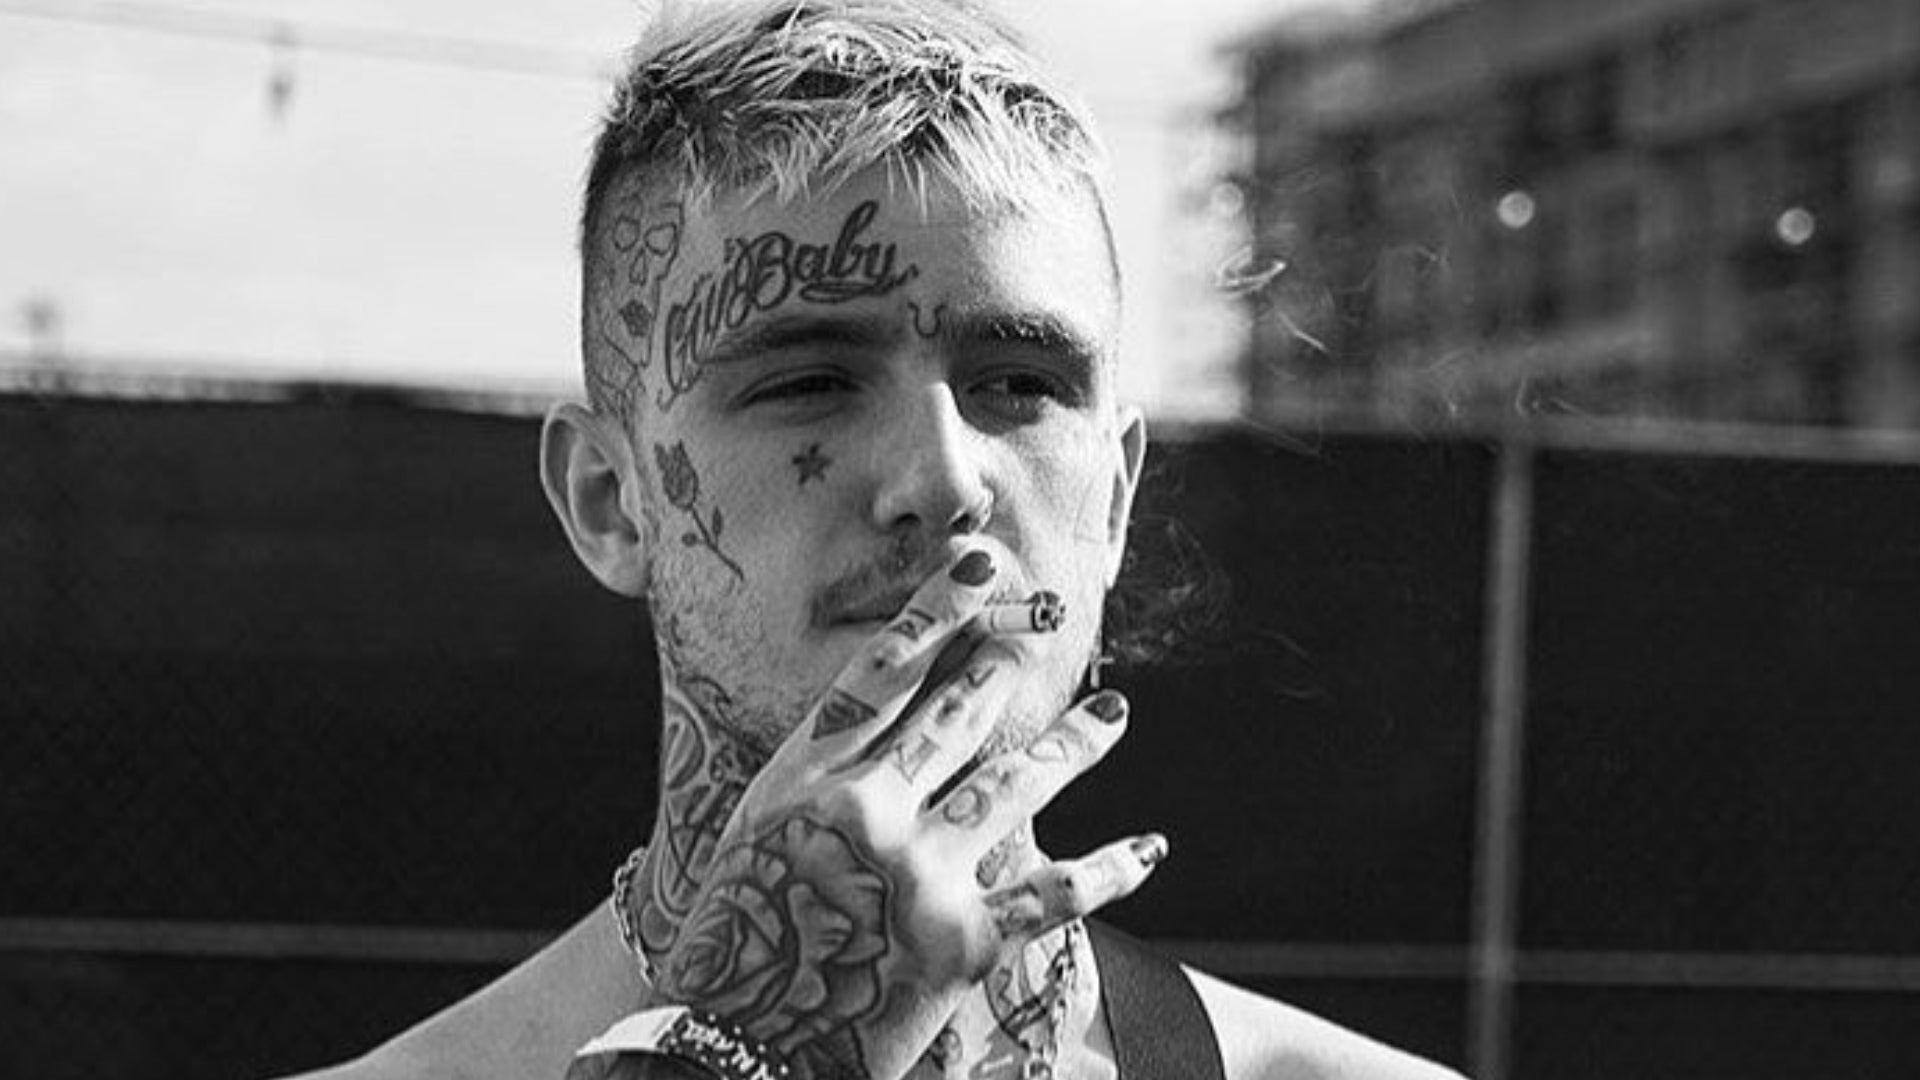 Lil Peep Dead at 21 -- Who Was the Up-and-Coming Rapper? | Entertainment Tonight1920 x 1080